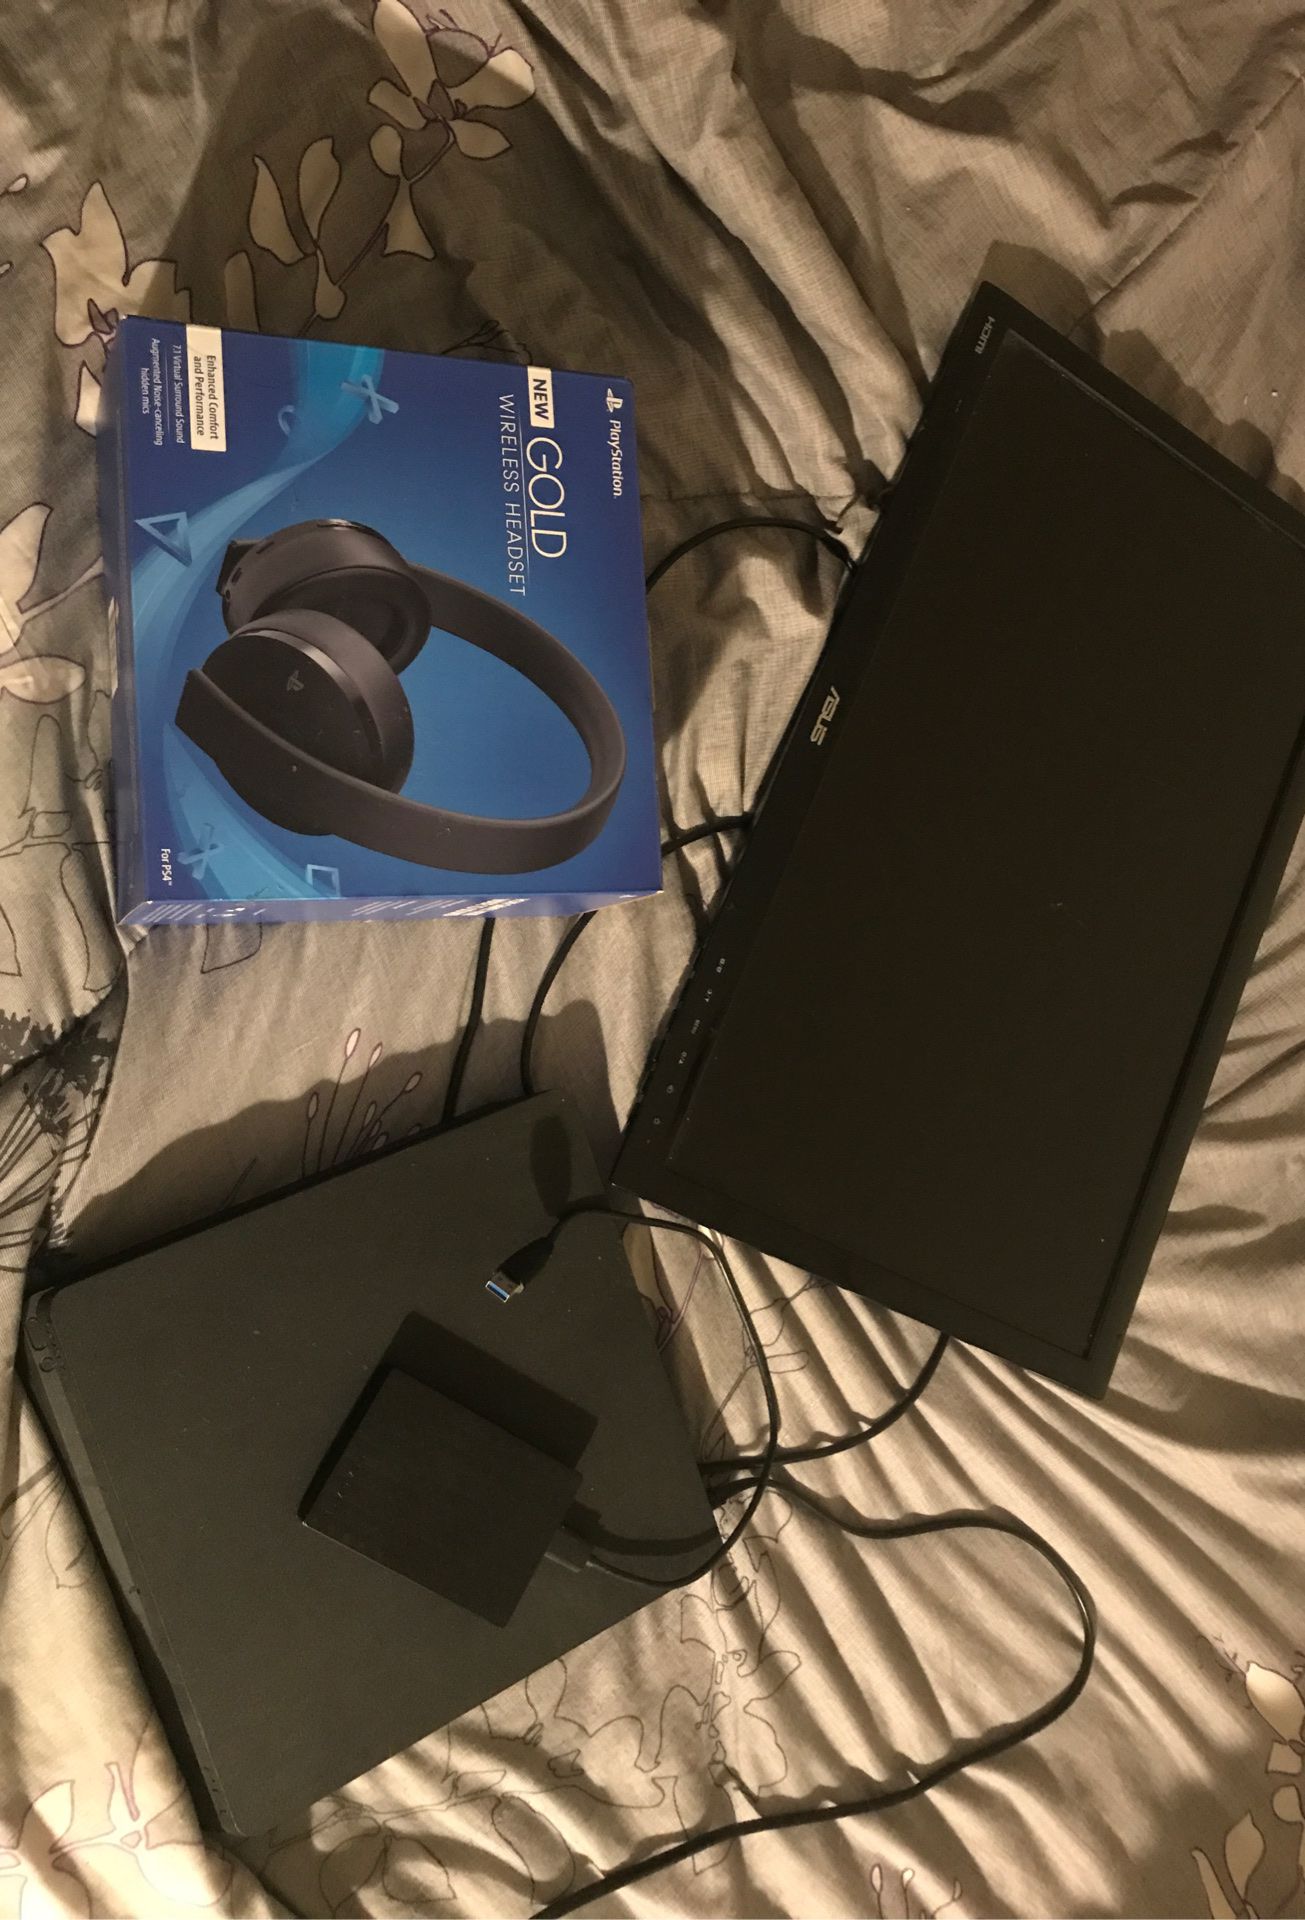 PS4 500 gbs with a 1tb seagate harddrive, and a couple more items